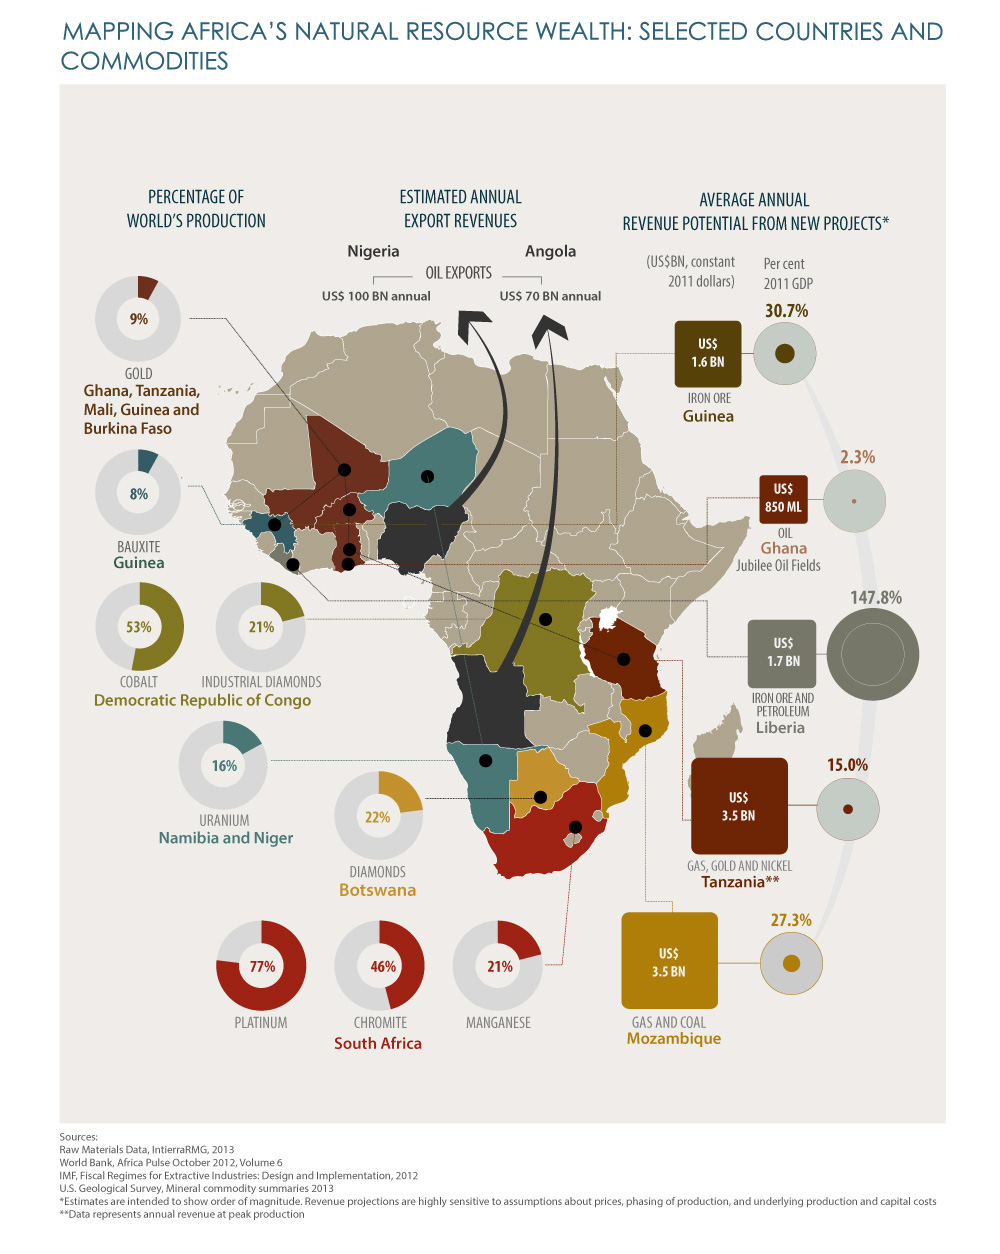 Mapping Africa's natural resource wealth